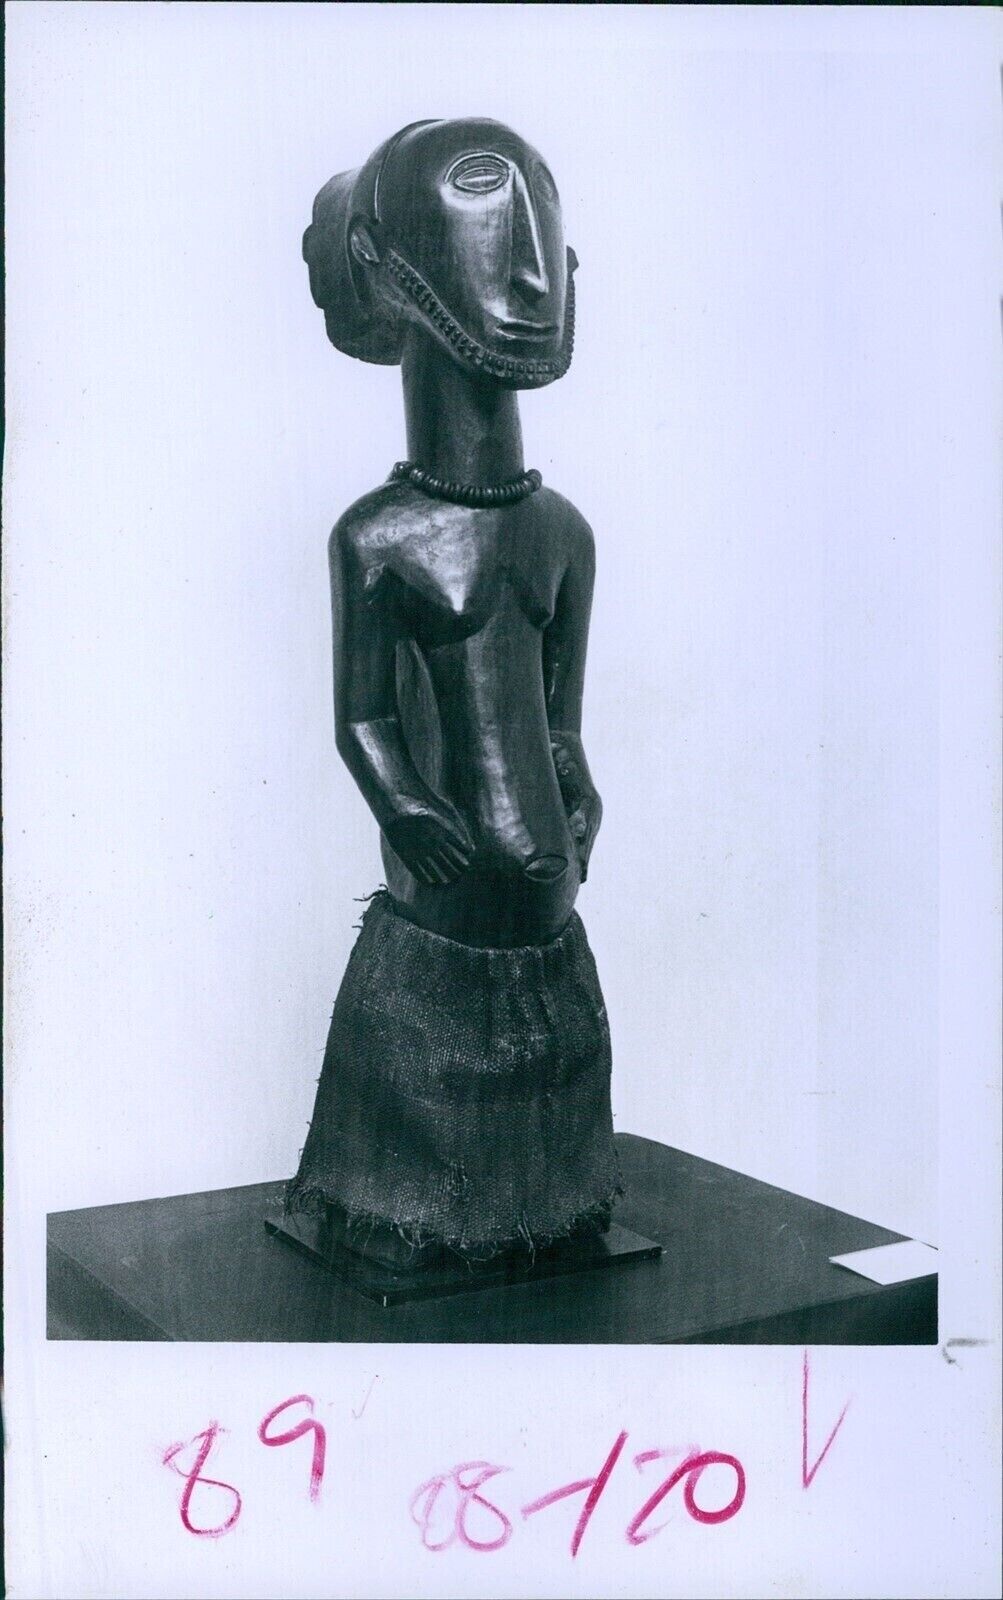 1976 Ancestral Male Figure From Congo Africa Showing At Pelham Art 5X7 Photo